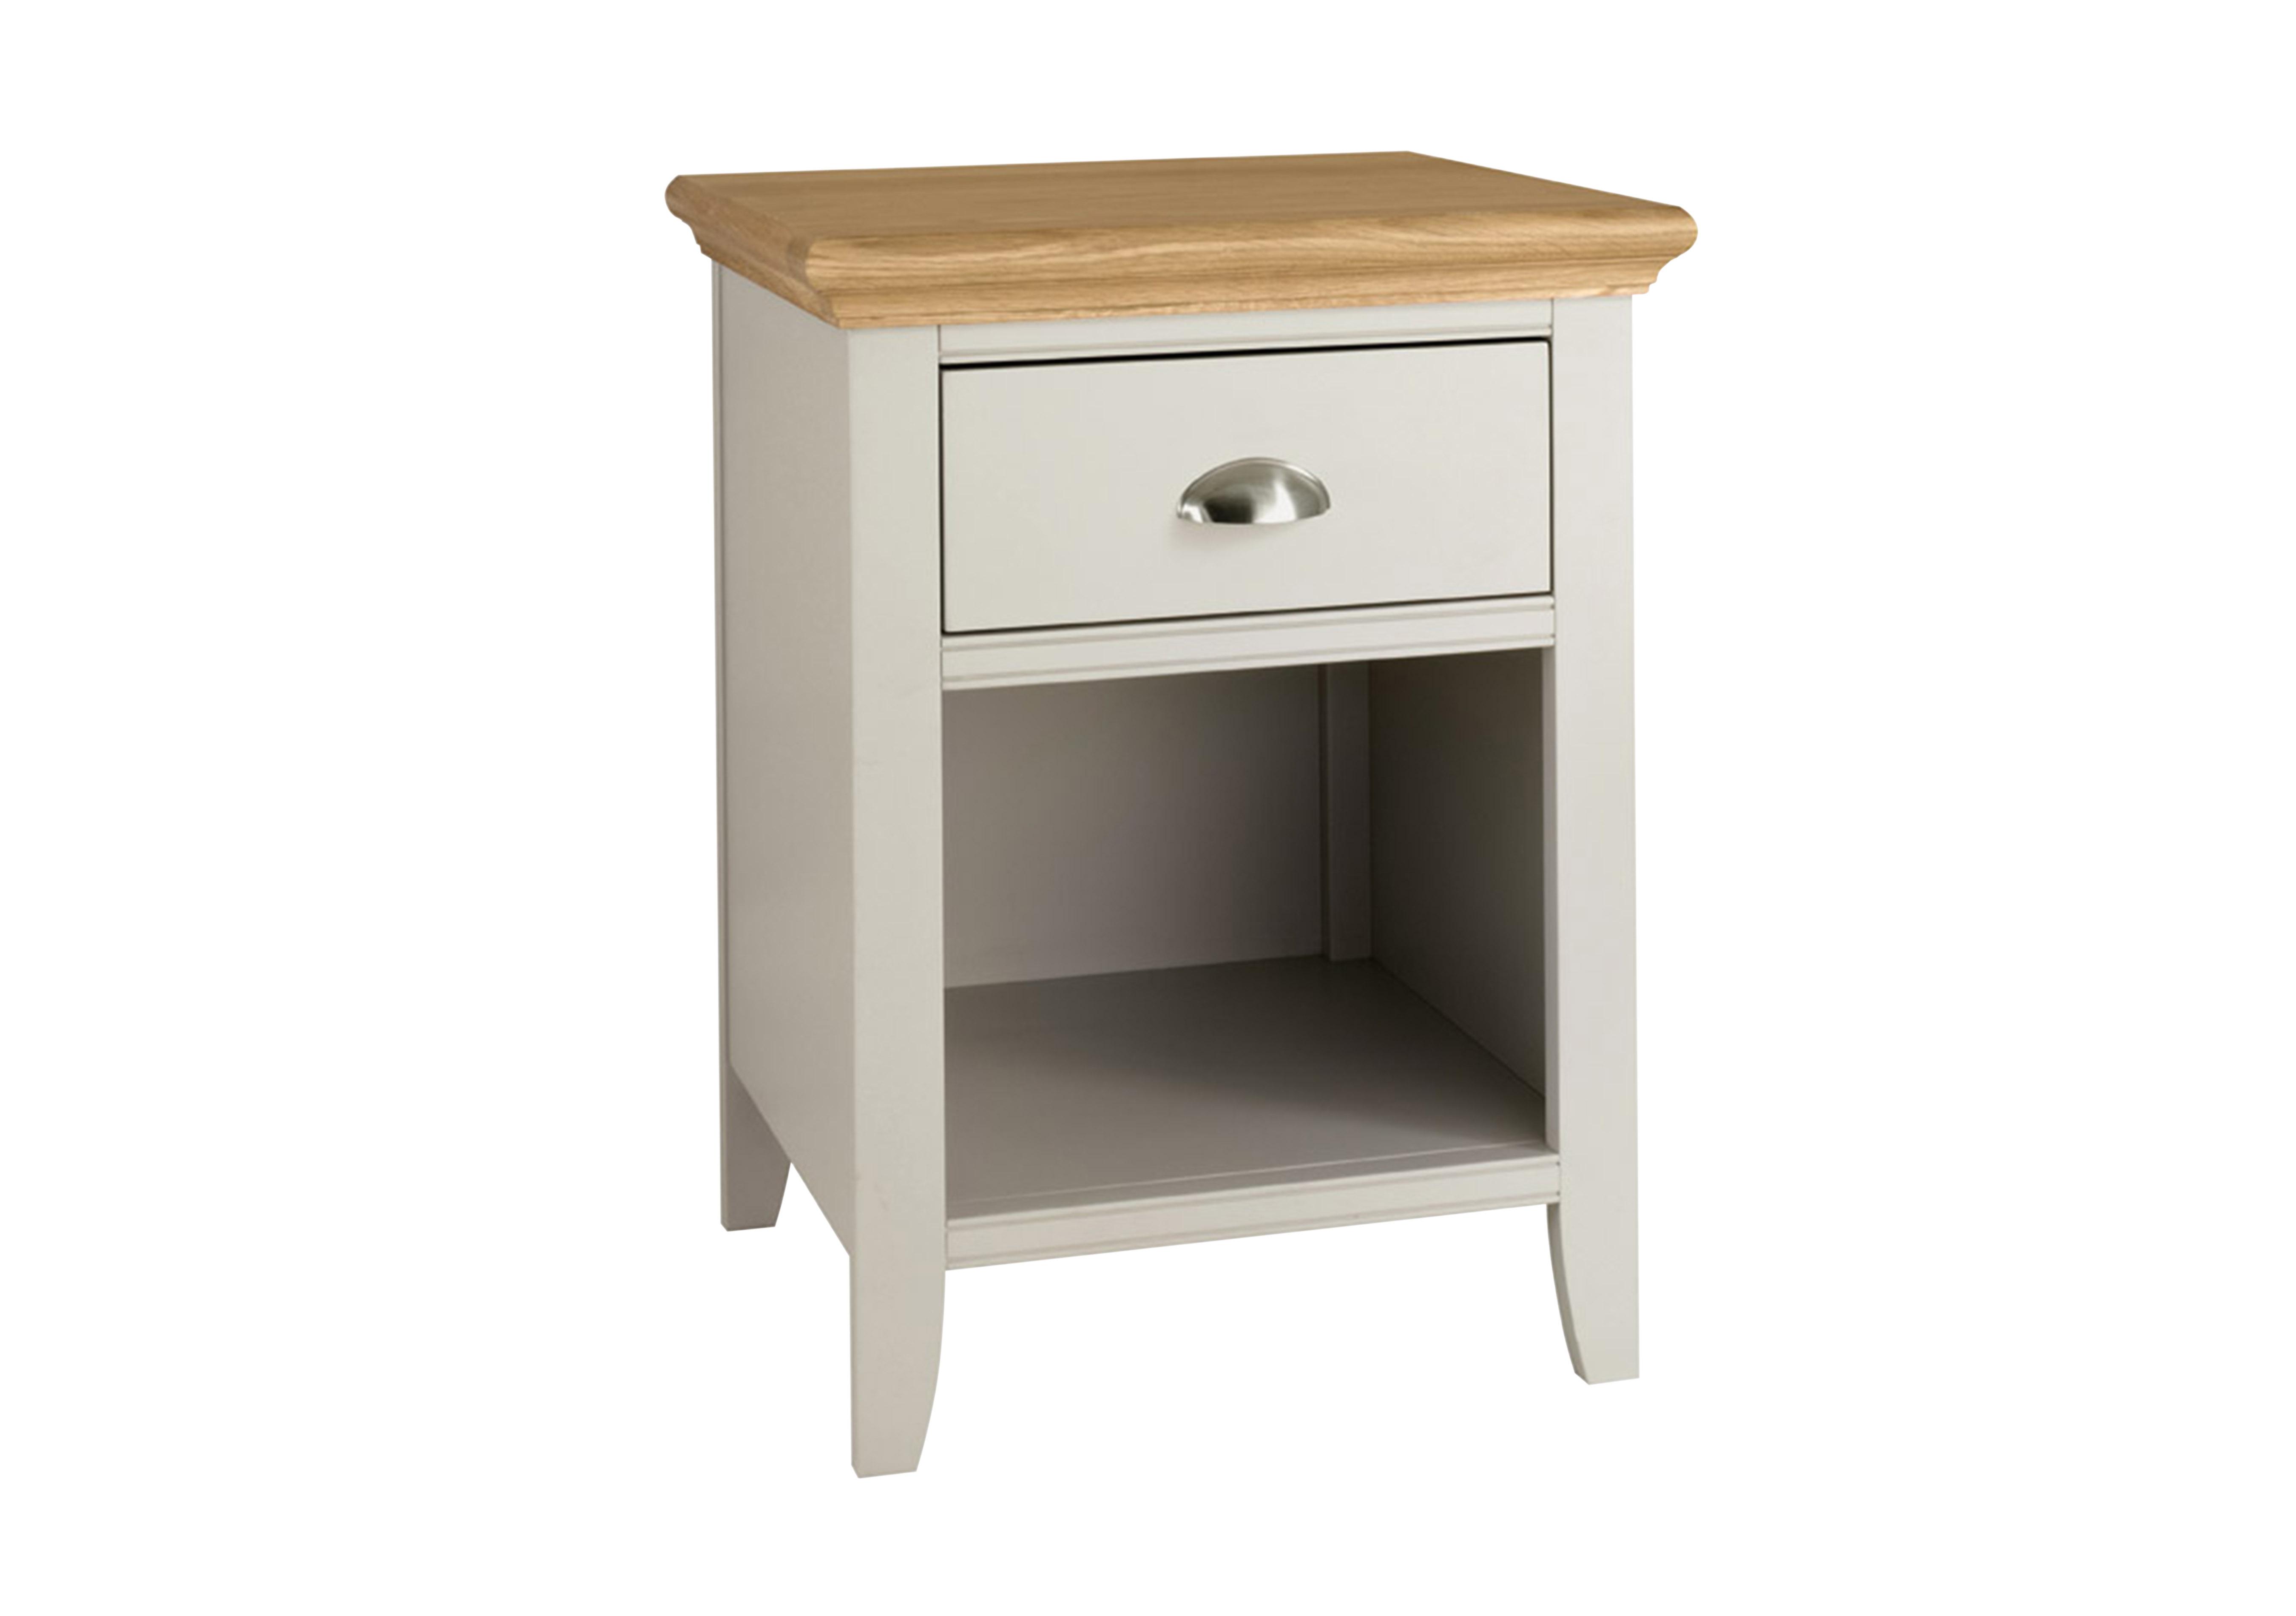 Emily 1 Drawer Nightstand in Soft Grey And Oak on Furniture Village